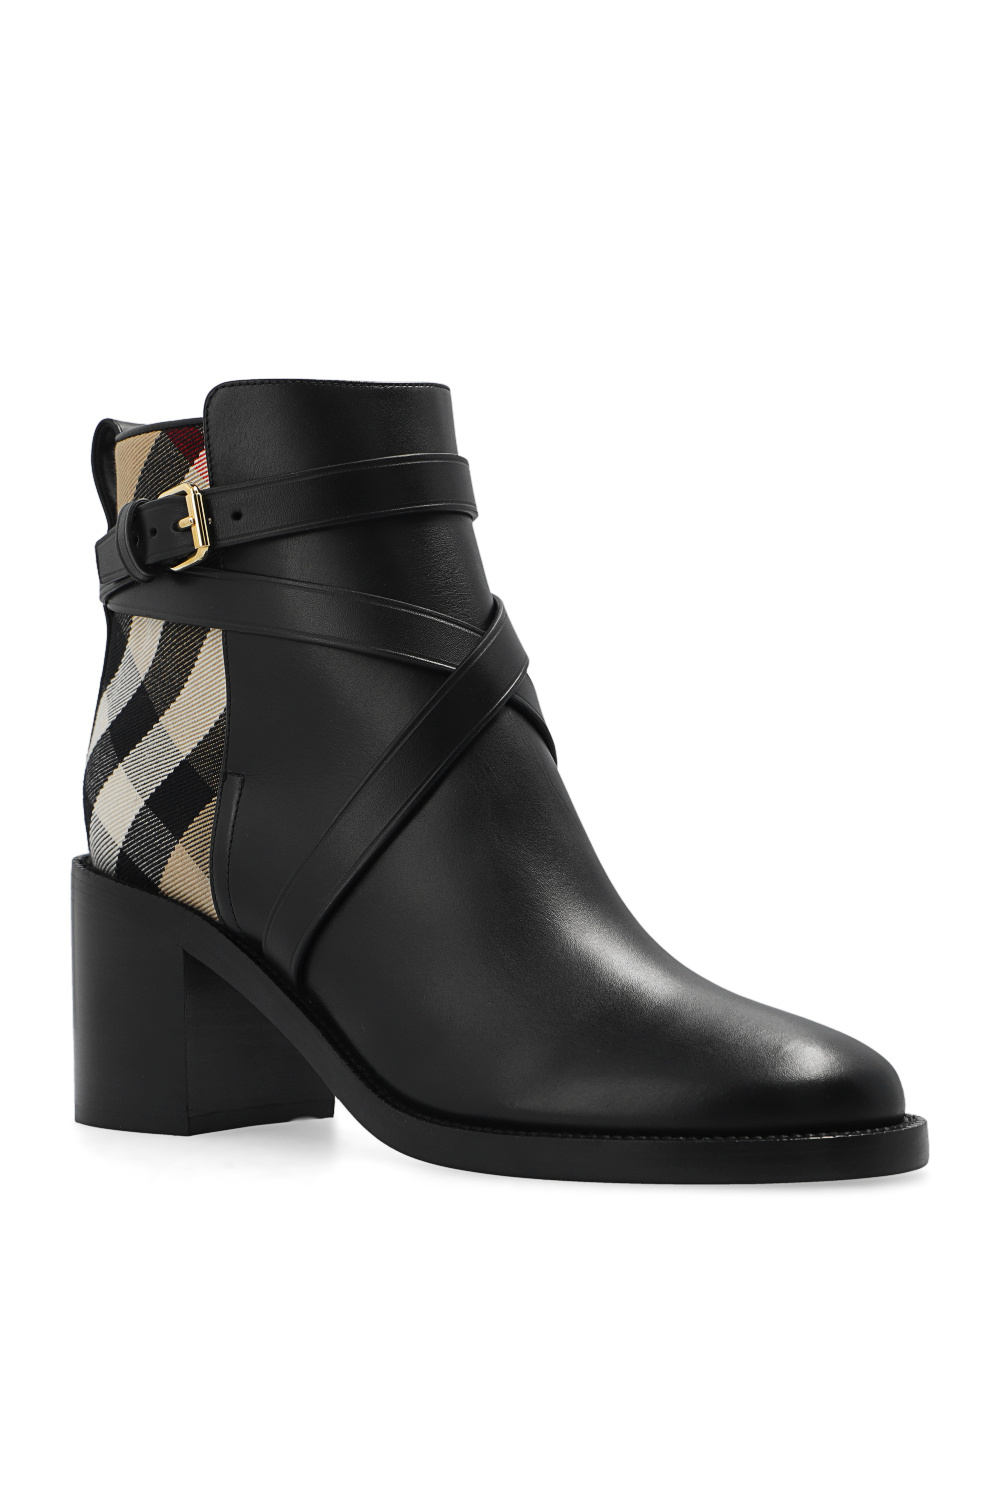 burberry black ‘New Pryle’ heeled ankle boots